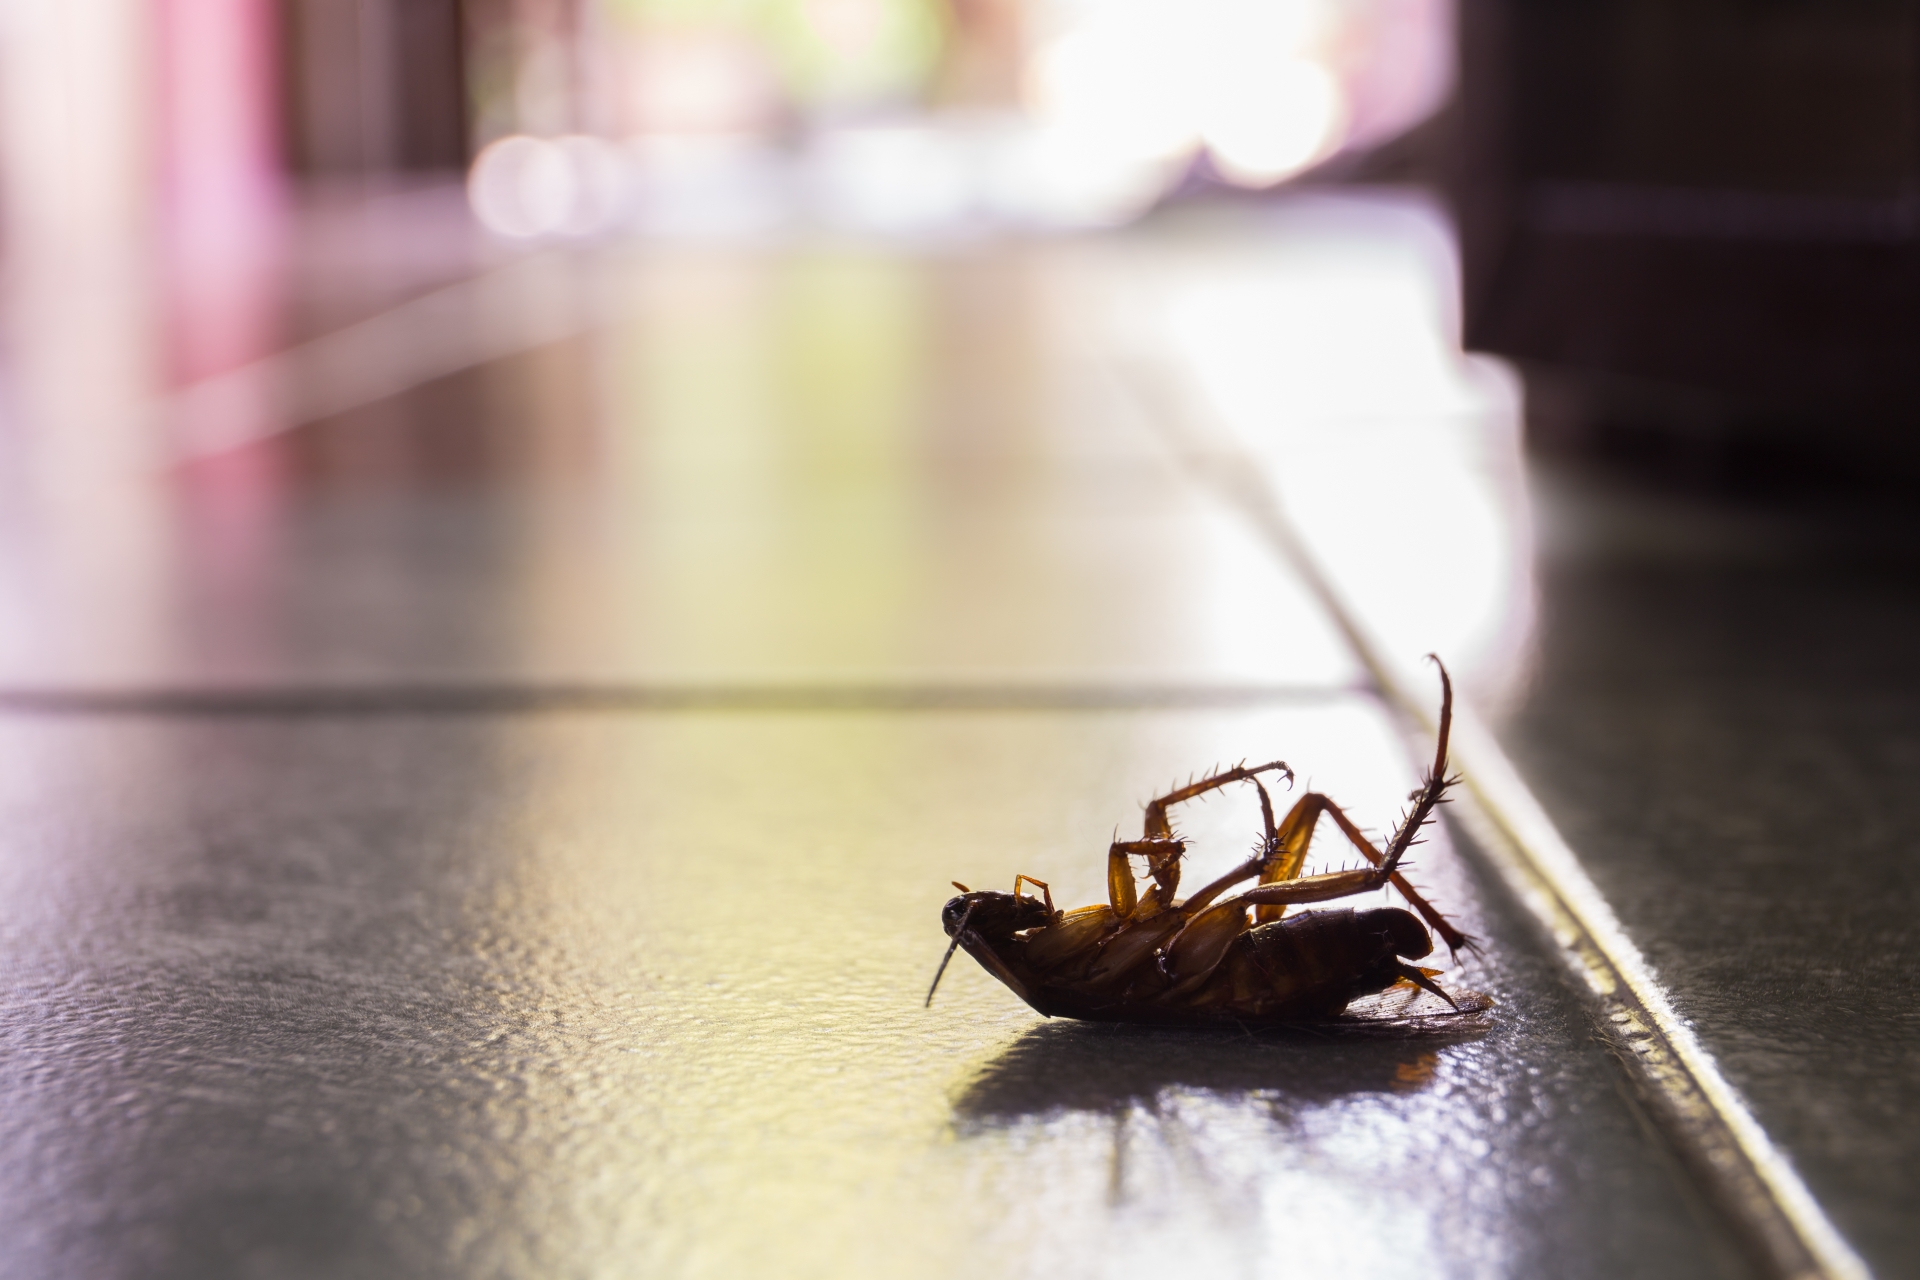 Cockroach Control, Pest Control in East Ham, Beckton, E6. Call Now 020 8166 9746